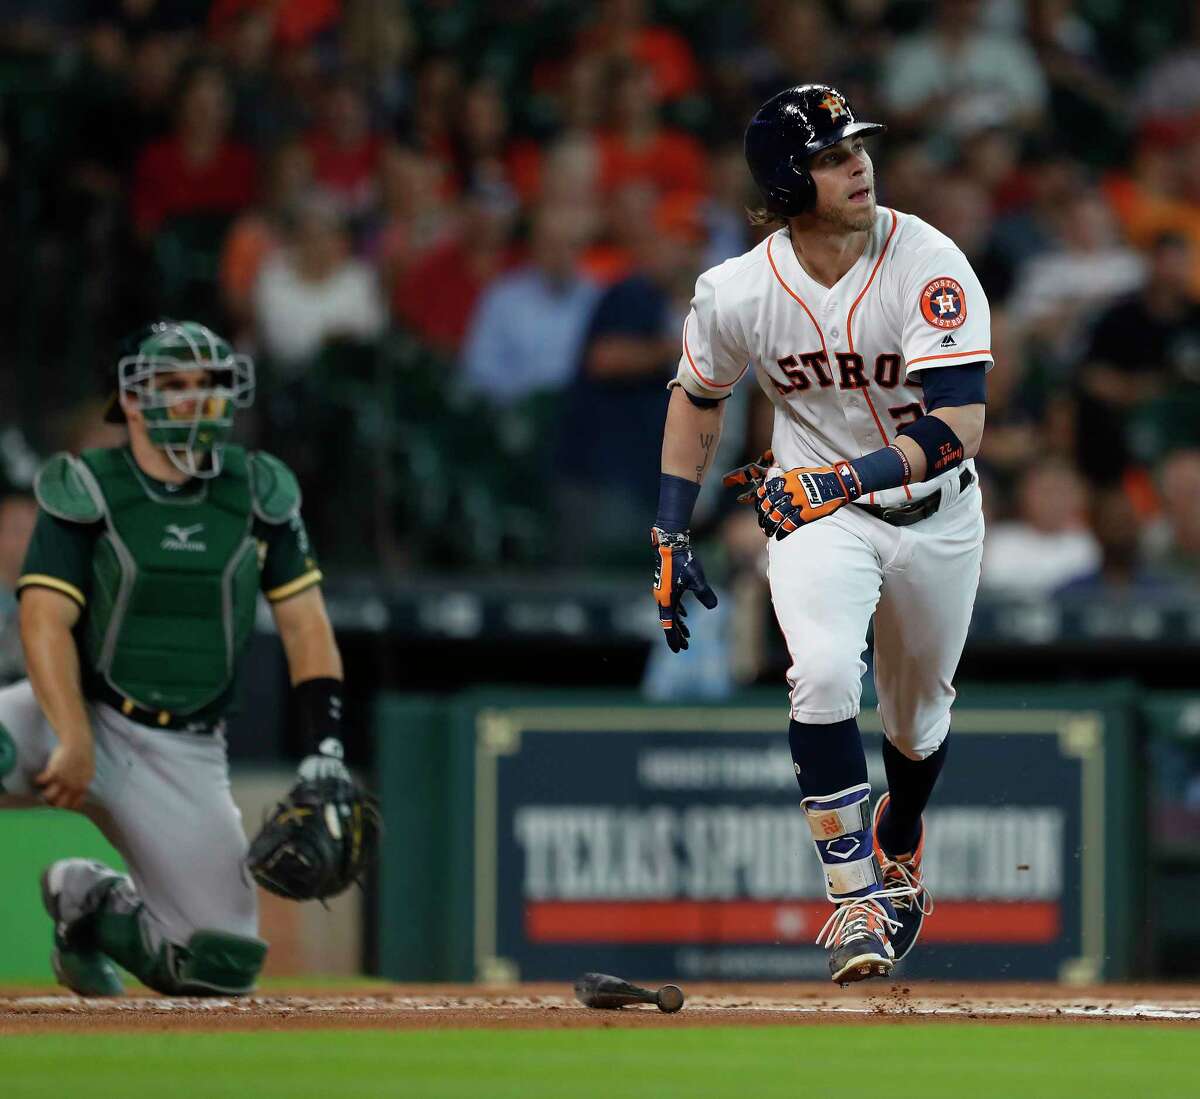 Houston Astros Josh Reddick (22) watches his ball head to the right field wall as Oakland Athletics right fielder Matt Joyce jumped up to haul it in during the first inning of an MLB baseball game at Minute Maid Park, Thursday, June, 29, 2017.